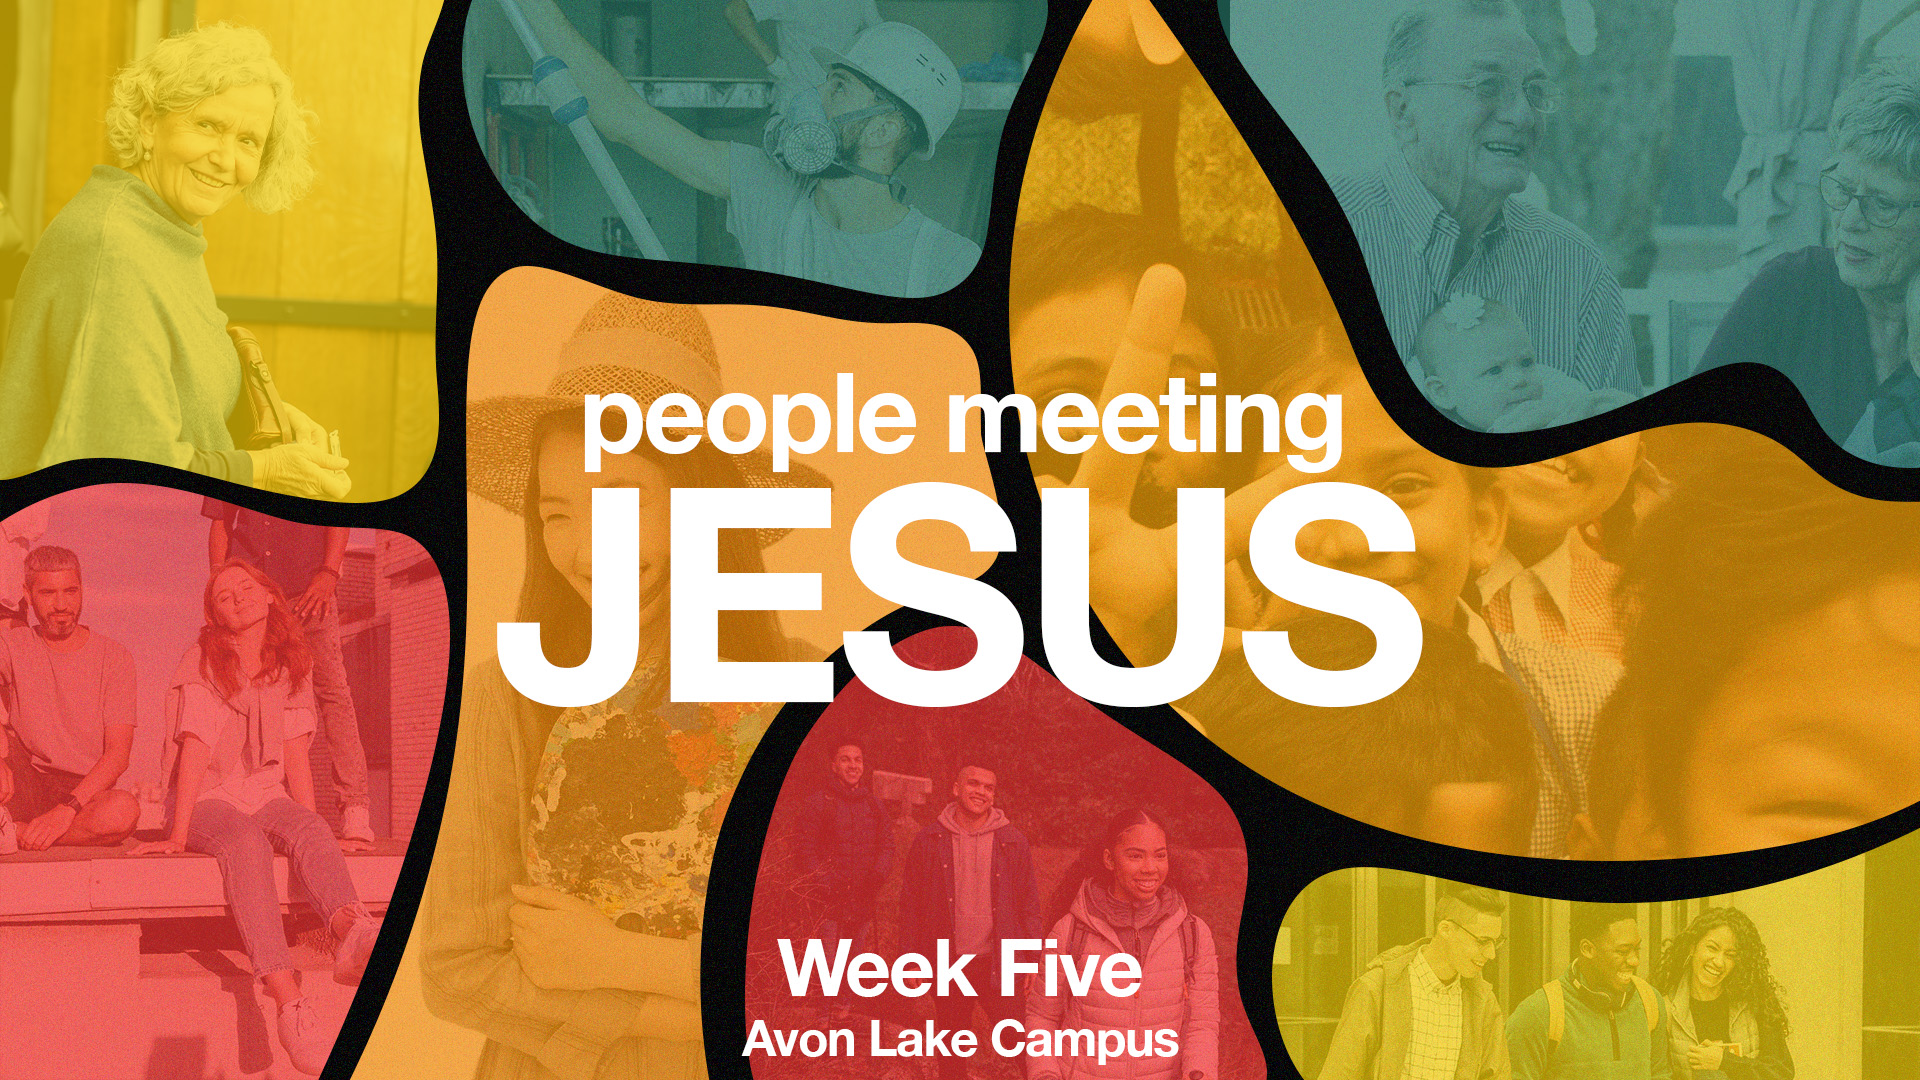 Featured image for “Week Five | Avon Lake Campus”